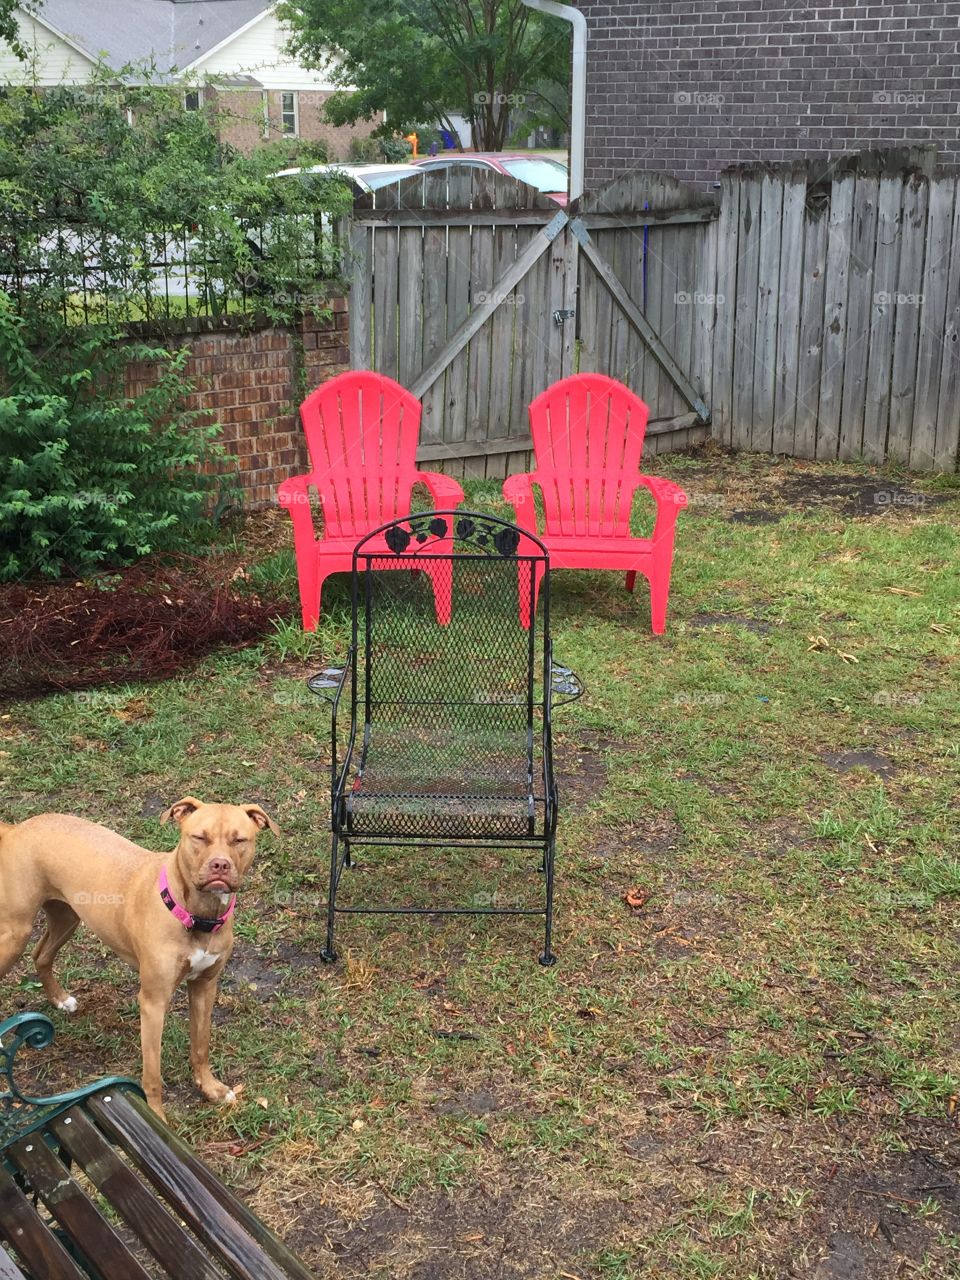 Summer chairs photo bomb.